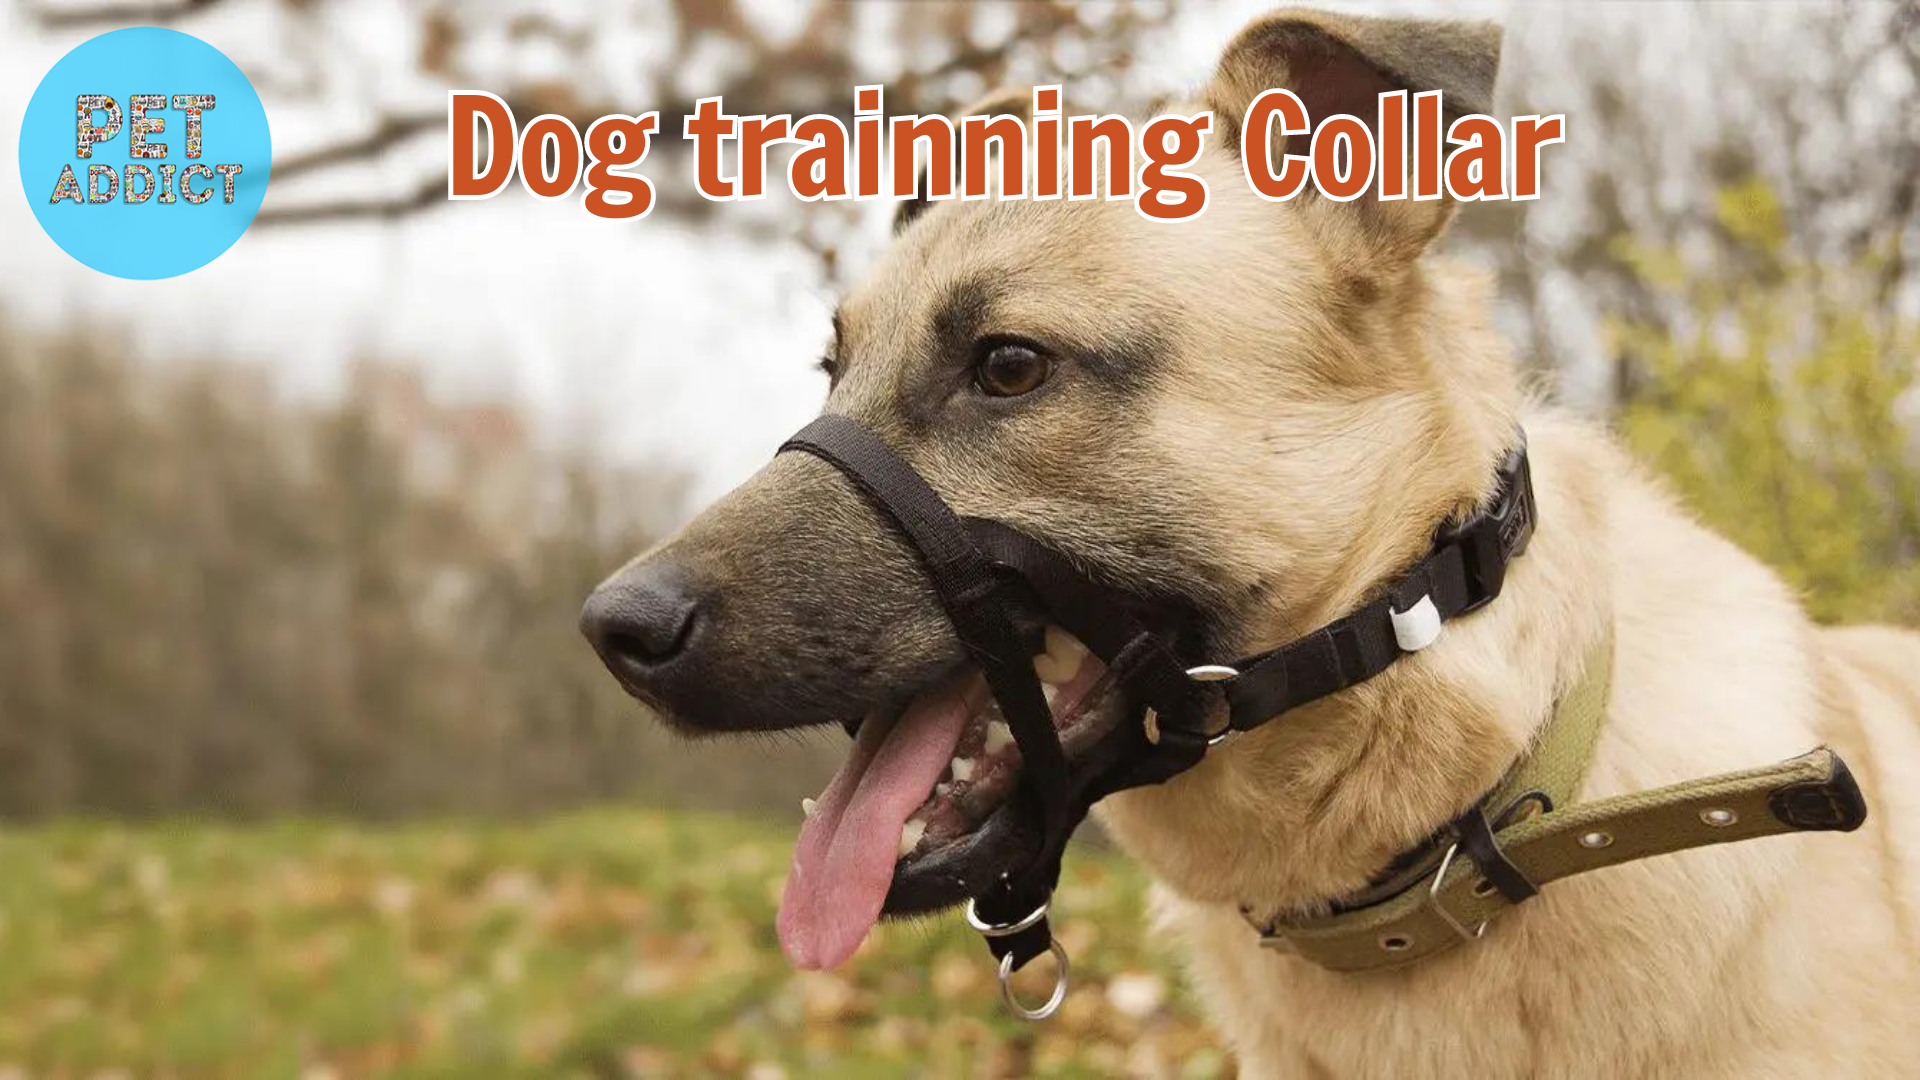 Dog Training Collars: An Effective Tool for Positive Training